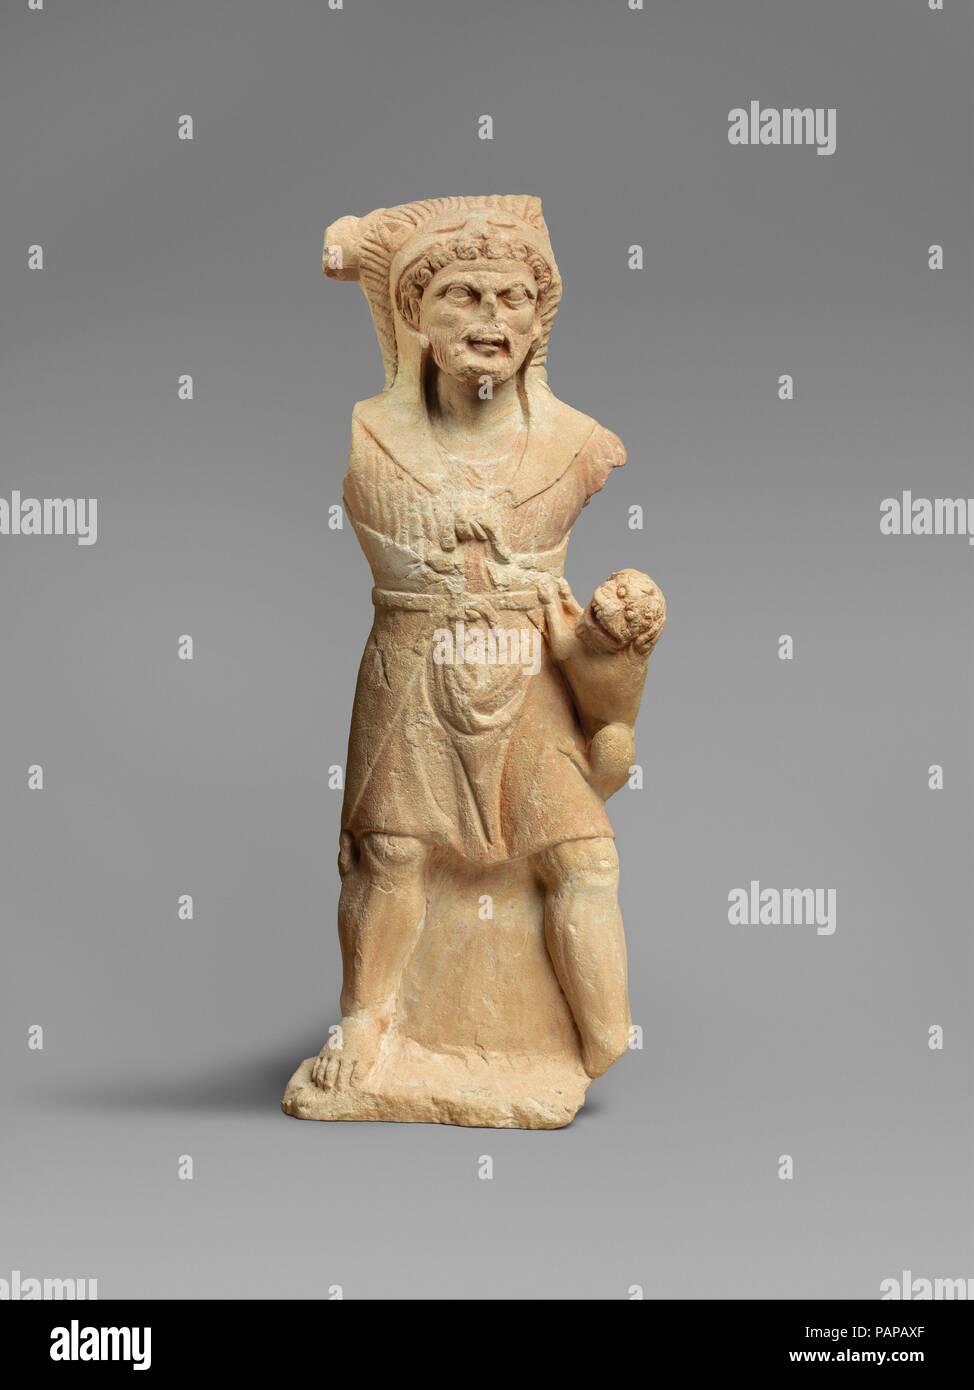 Limestone statue of Herakles. Culture: Cypriot. Dimensions: Overall: 21 3/8 x 8 x 2 3/4 in. (54.3 x 20.3 x 7 cm). Date: 2nd half of the 4th century B.C..  In the late sixth century B.C. a local Cypriot god was assimilated with the powerful animal-slaying Greek hero, Herakles. On Cyprus he is shown bearded or beardless, wearing a lion's skin and a short tunic and holding a miniature lion in his hand. Herakles was the male divinity most often represented in Cypriot sanctuaries. In the Classical period, King Evagoras of Salamis placed images of Herakles as a Panhellenic hero on his coinage. At th Stock Photo